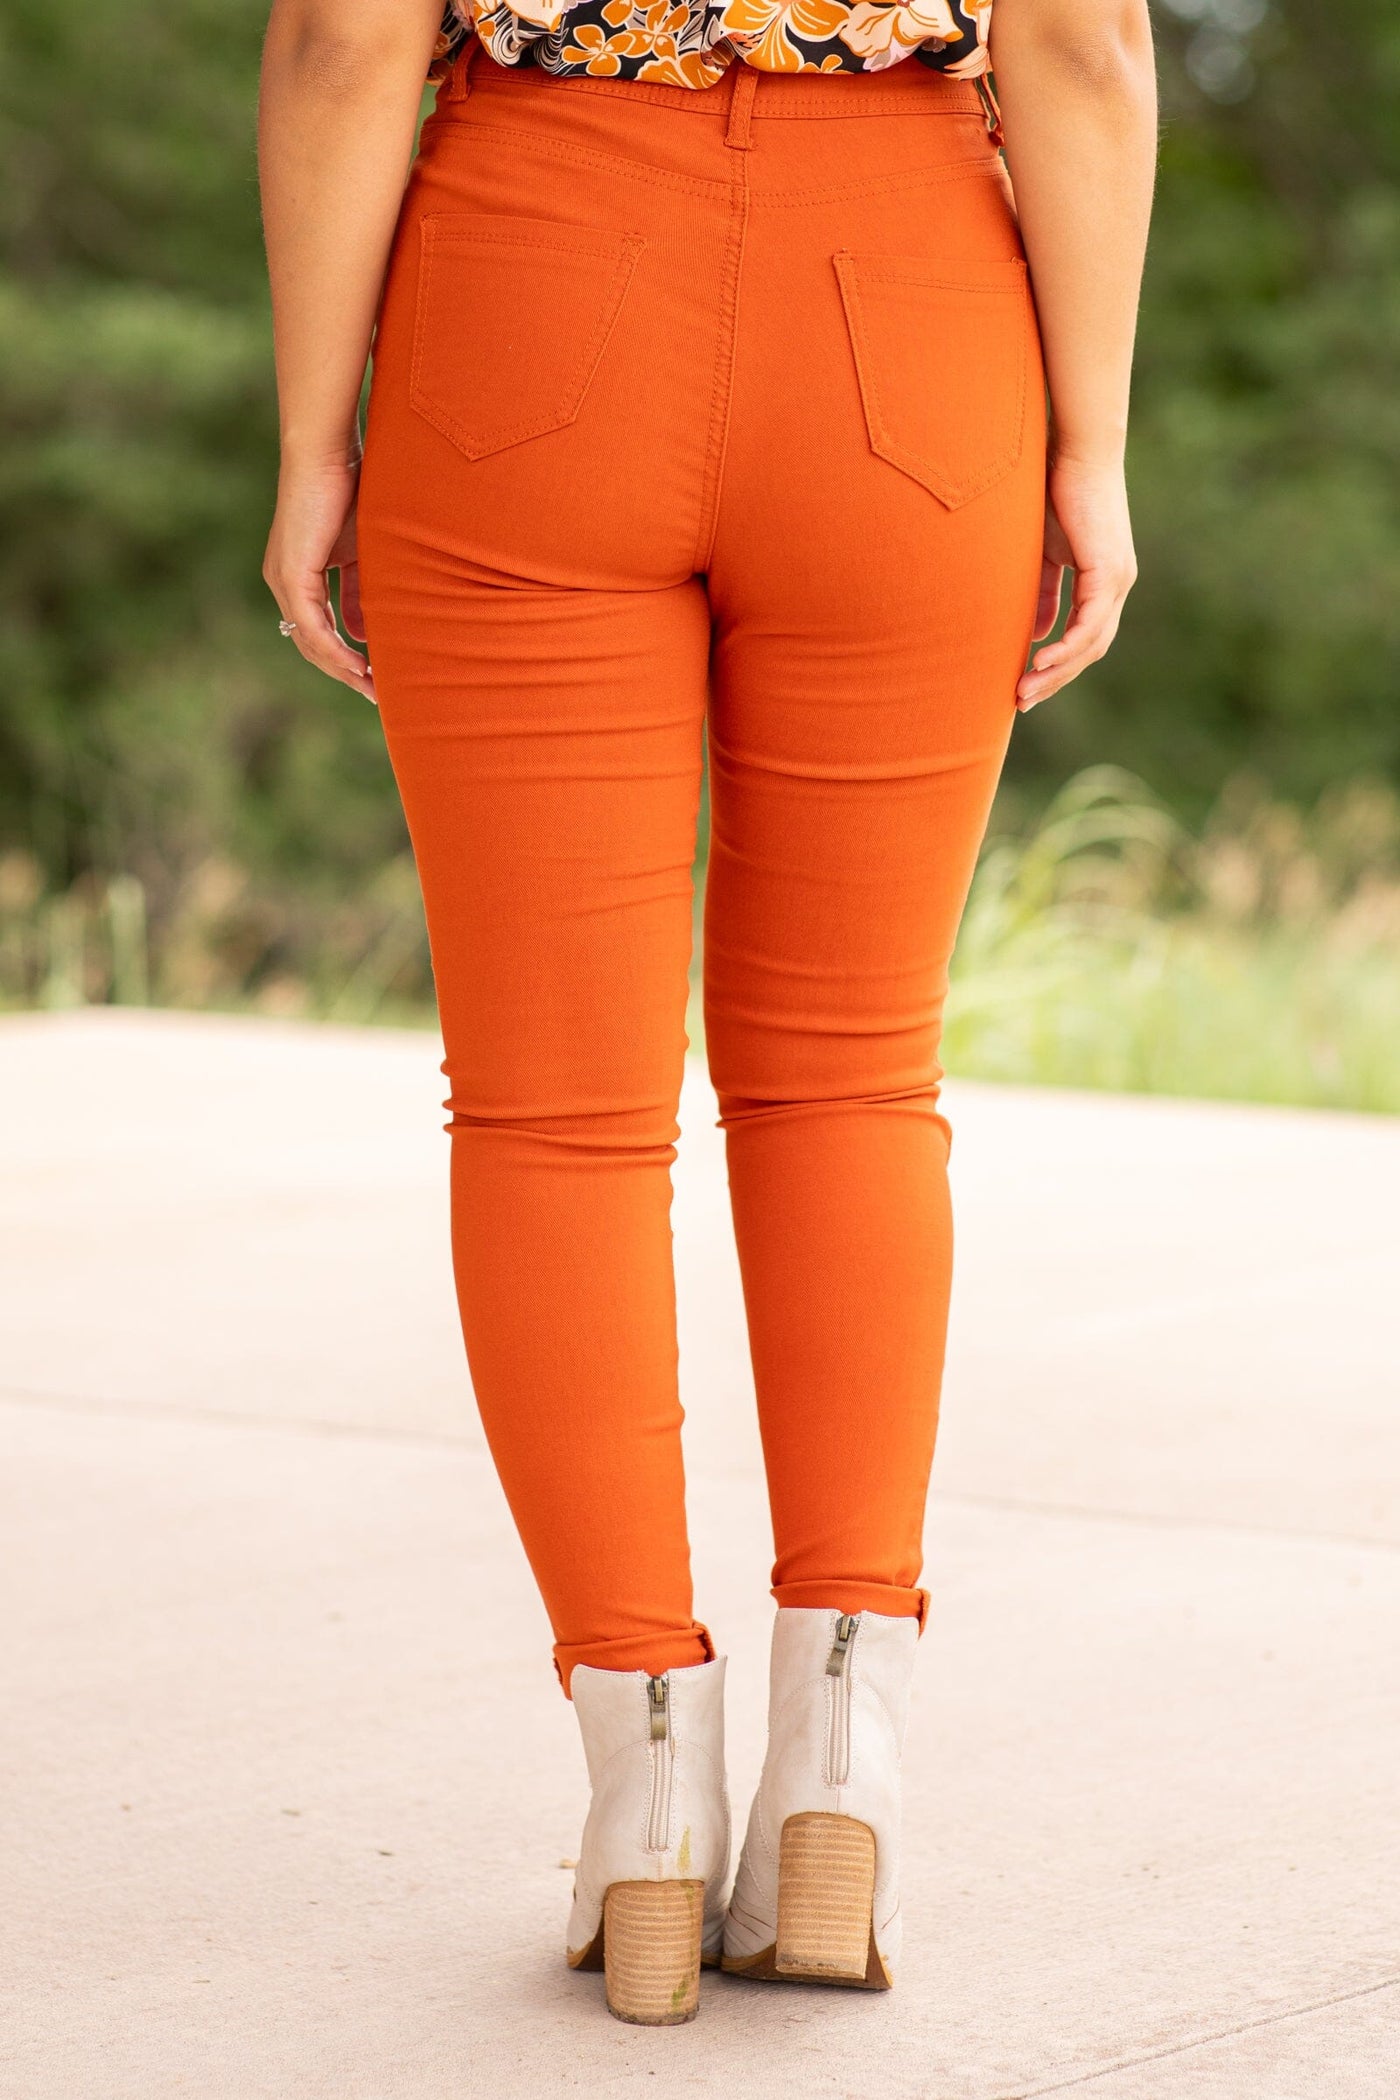 Burnt Orange Skinny Fit High Rise Pants - Filly Flair